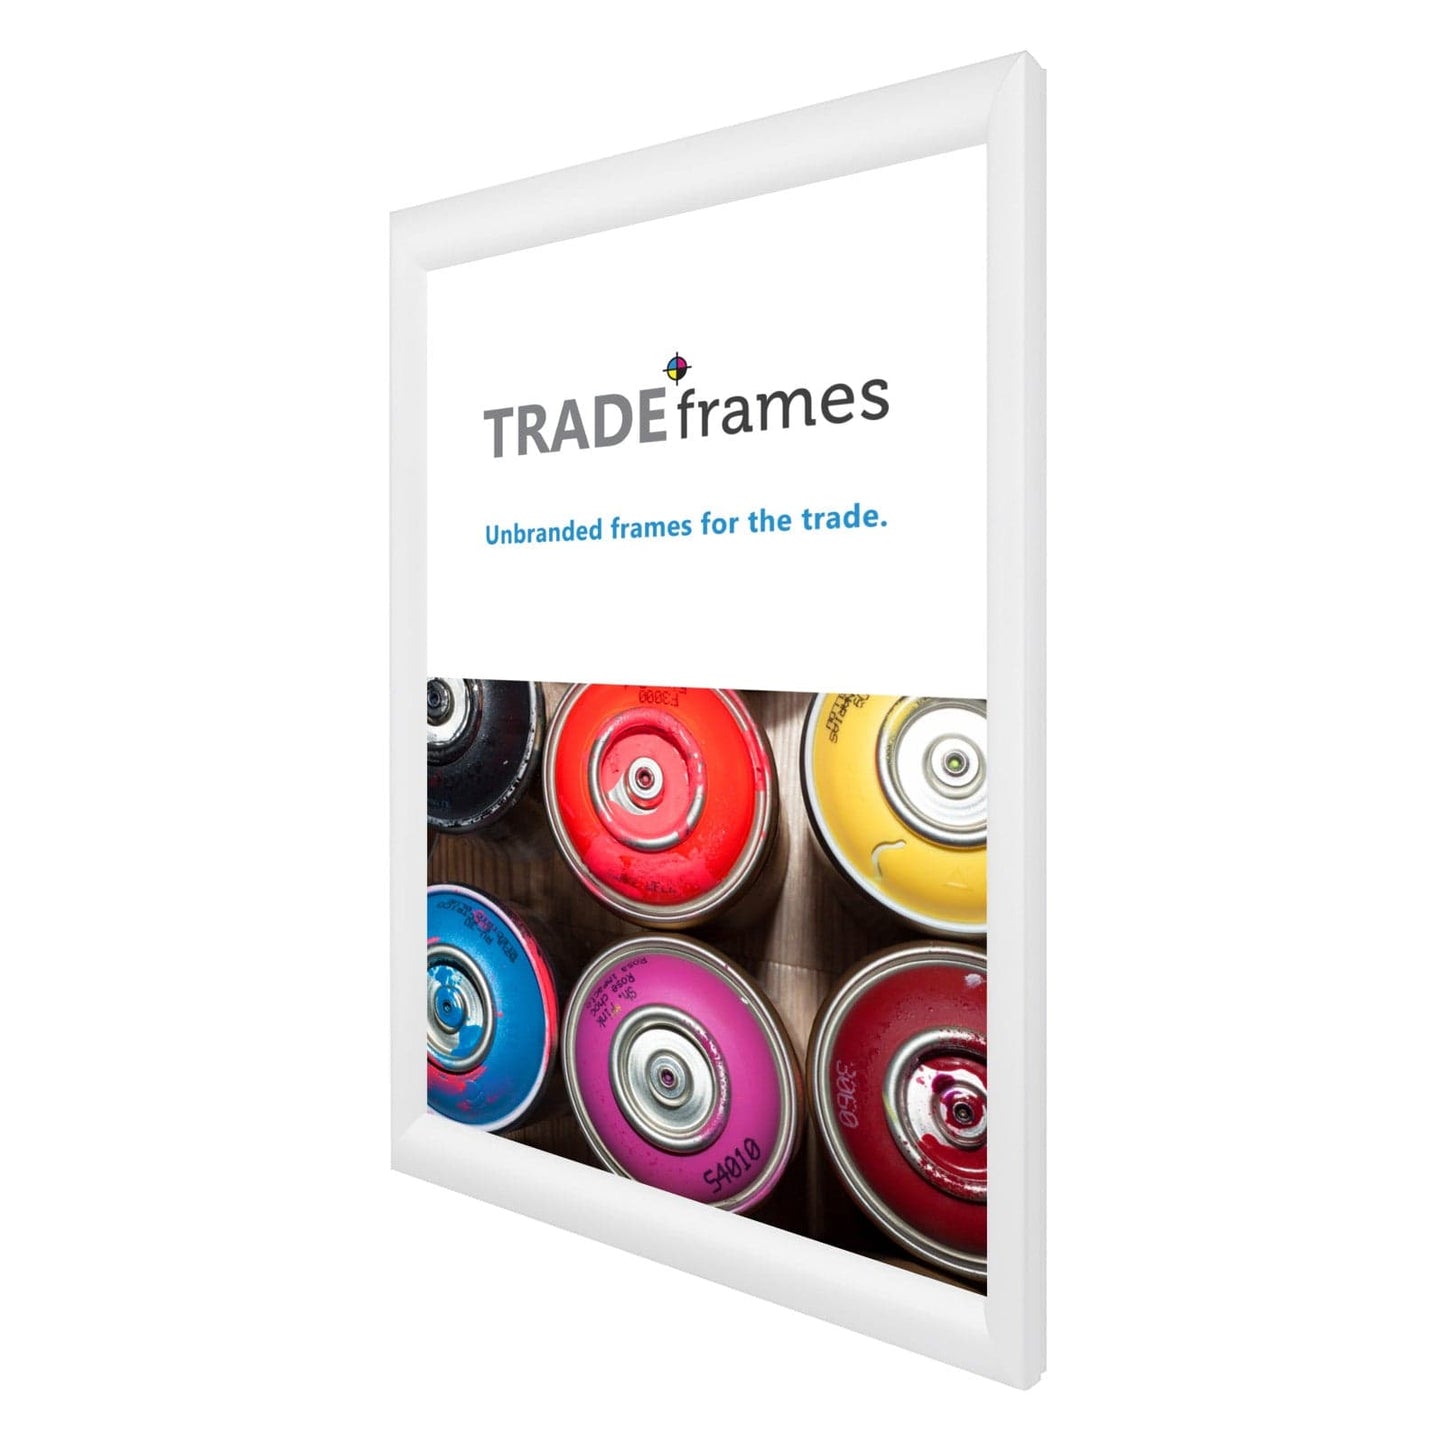 13x19 TRADEframe White Snap Frame 13x19 - 1.2 inch profile - Snap Frames Direct